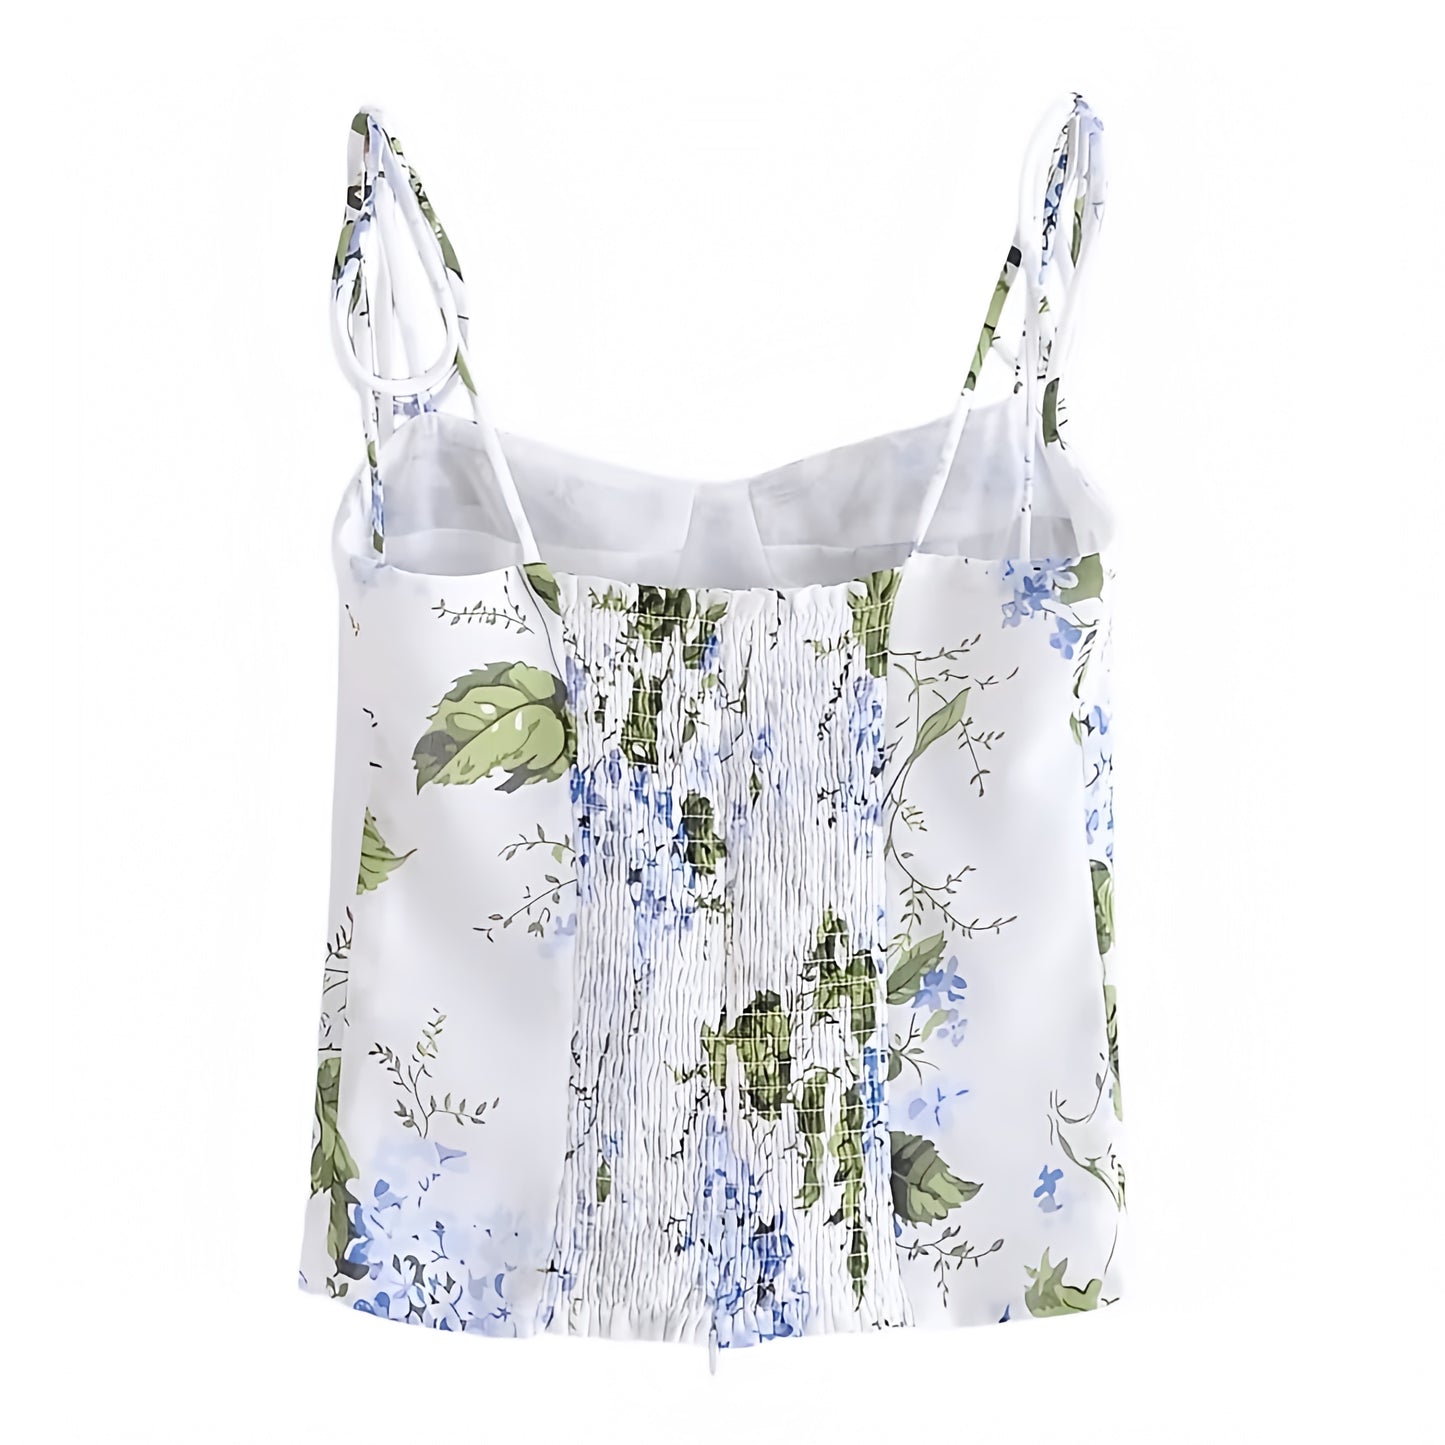 floral-print-light-blue-and-white-multi-color-flower-patterned-slim-fit-corset-bustier-bodycon-round-neck-spaghetti-strap-sleeveless-backless-open-back-camisole-crop-tank-top-blouse-women-ladies-chic-trendy-spring-2024-summer-elegant-casual-classy-feminine-semi-formal-preppy-style-coastal-granddaughter-hamptons-zara-revolve-loveshackfancy-altard-state-urban-outfitters-reformation-prettylittlething-princess-polly